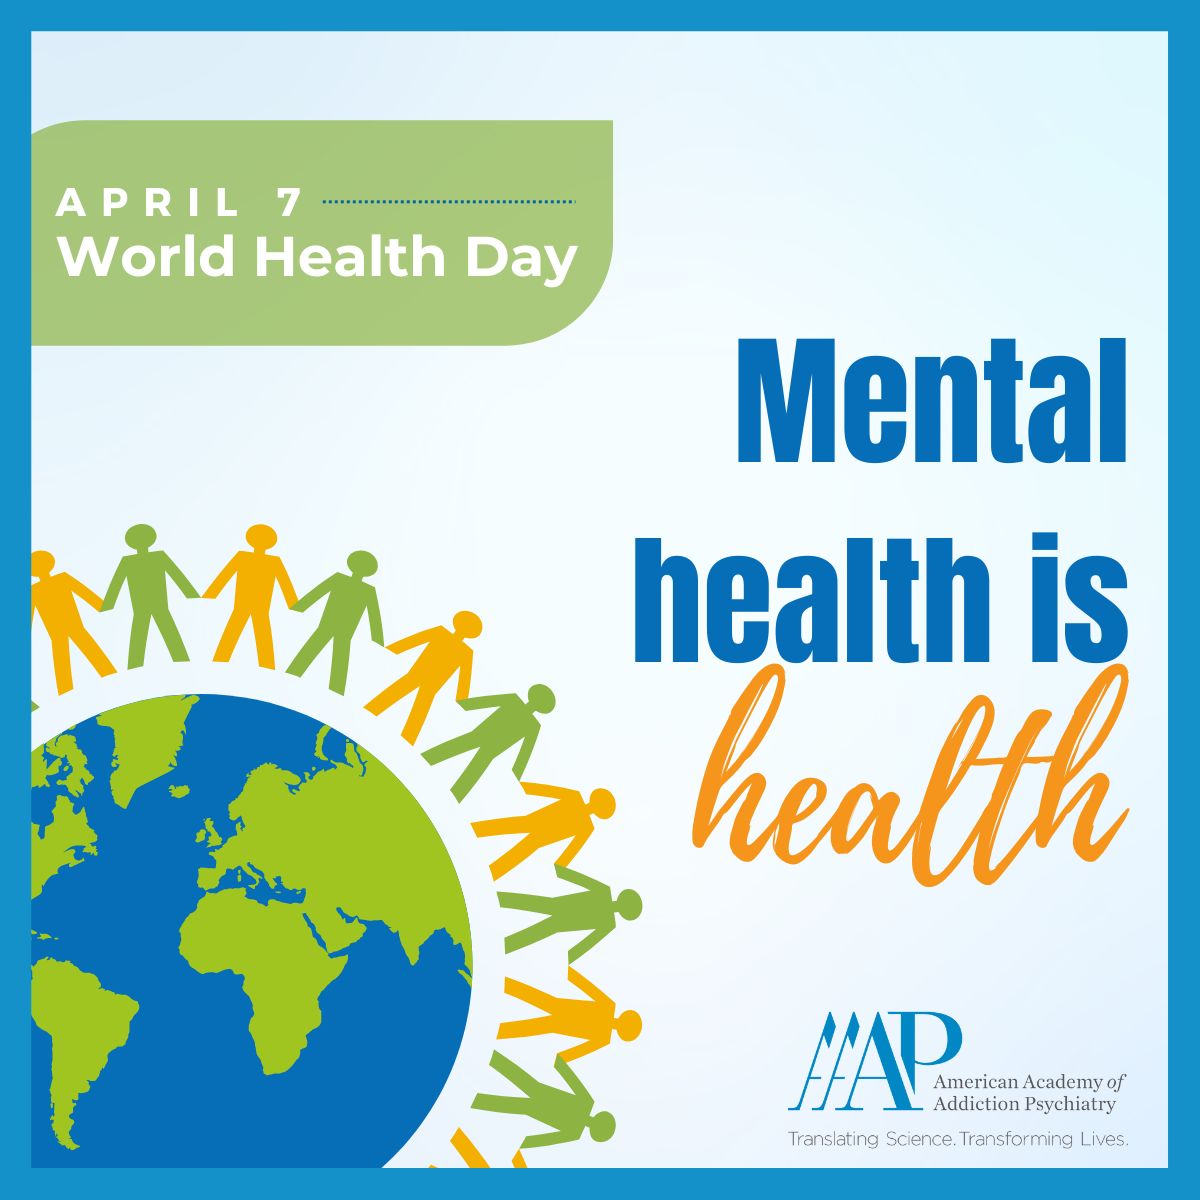 Everyone has a right to quality health services, education, and information, including substance use disorder treatment. Mental health is health. #WorldHealthDay